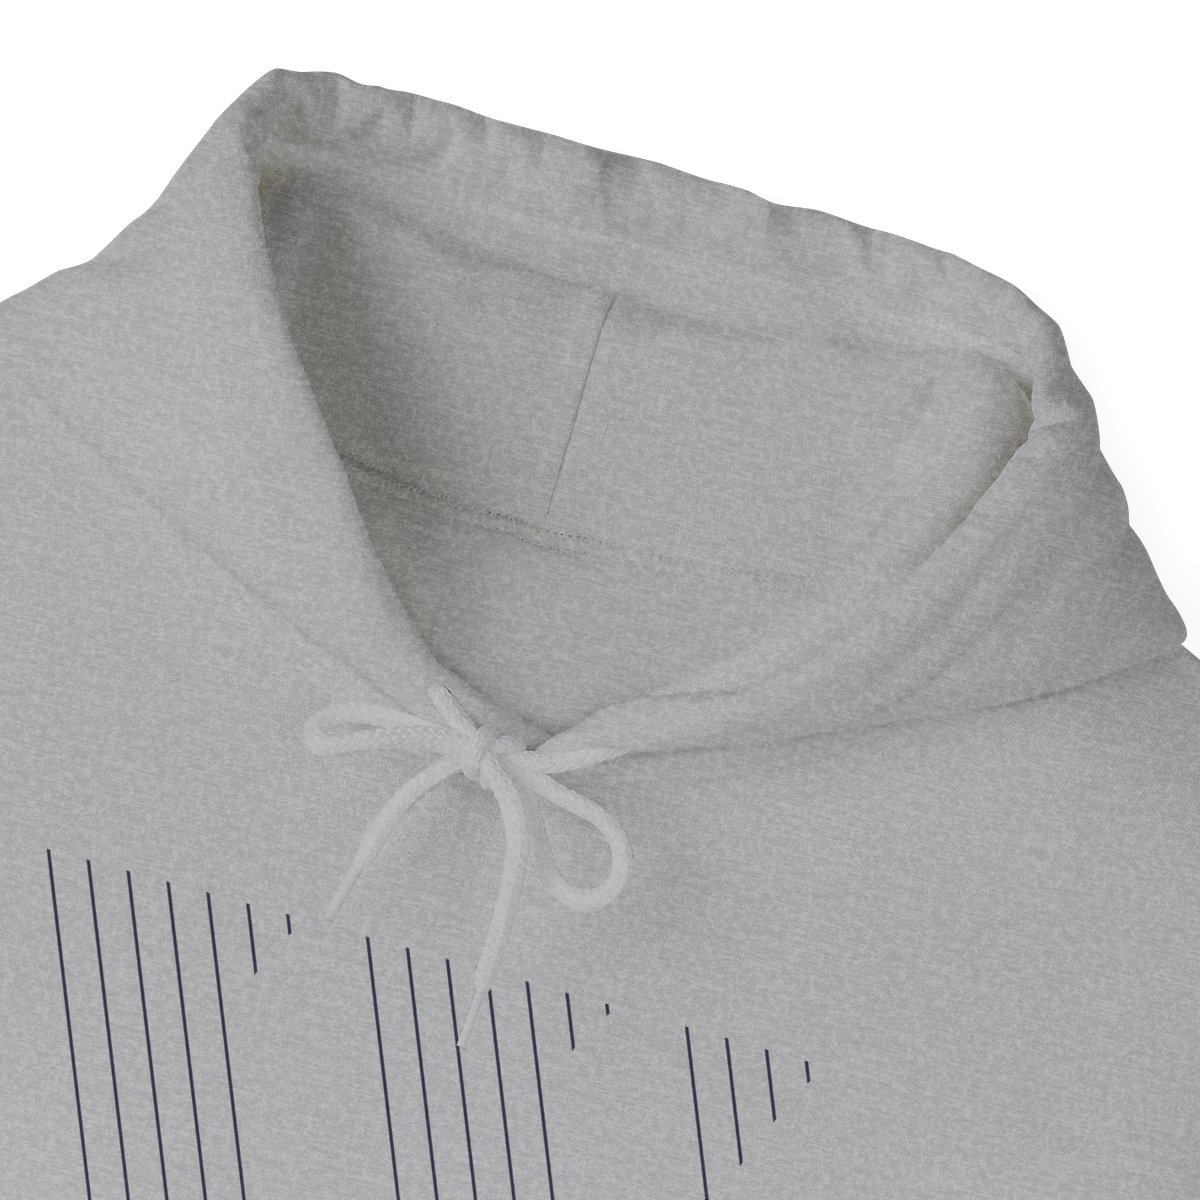 Lined W Hoodie product thumbnail image